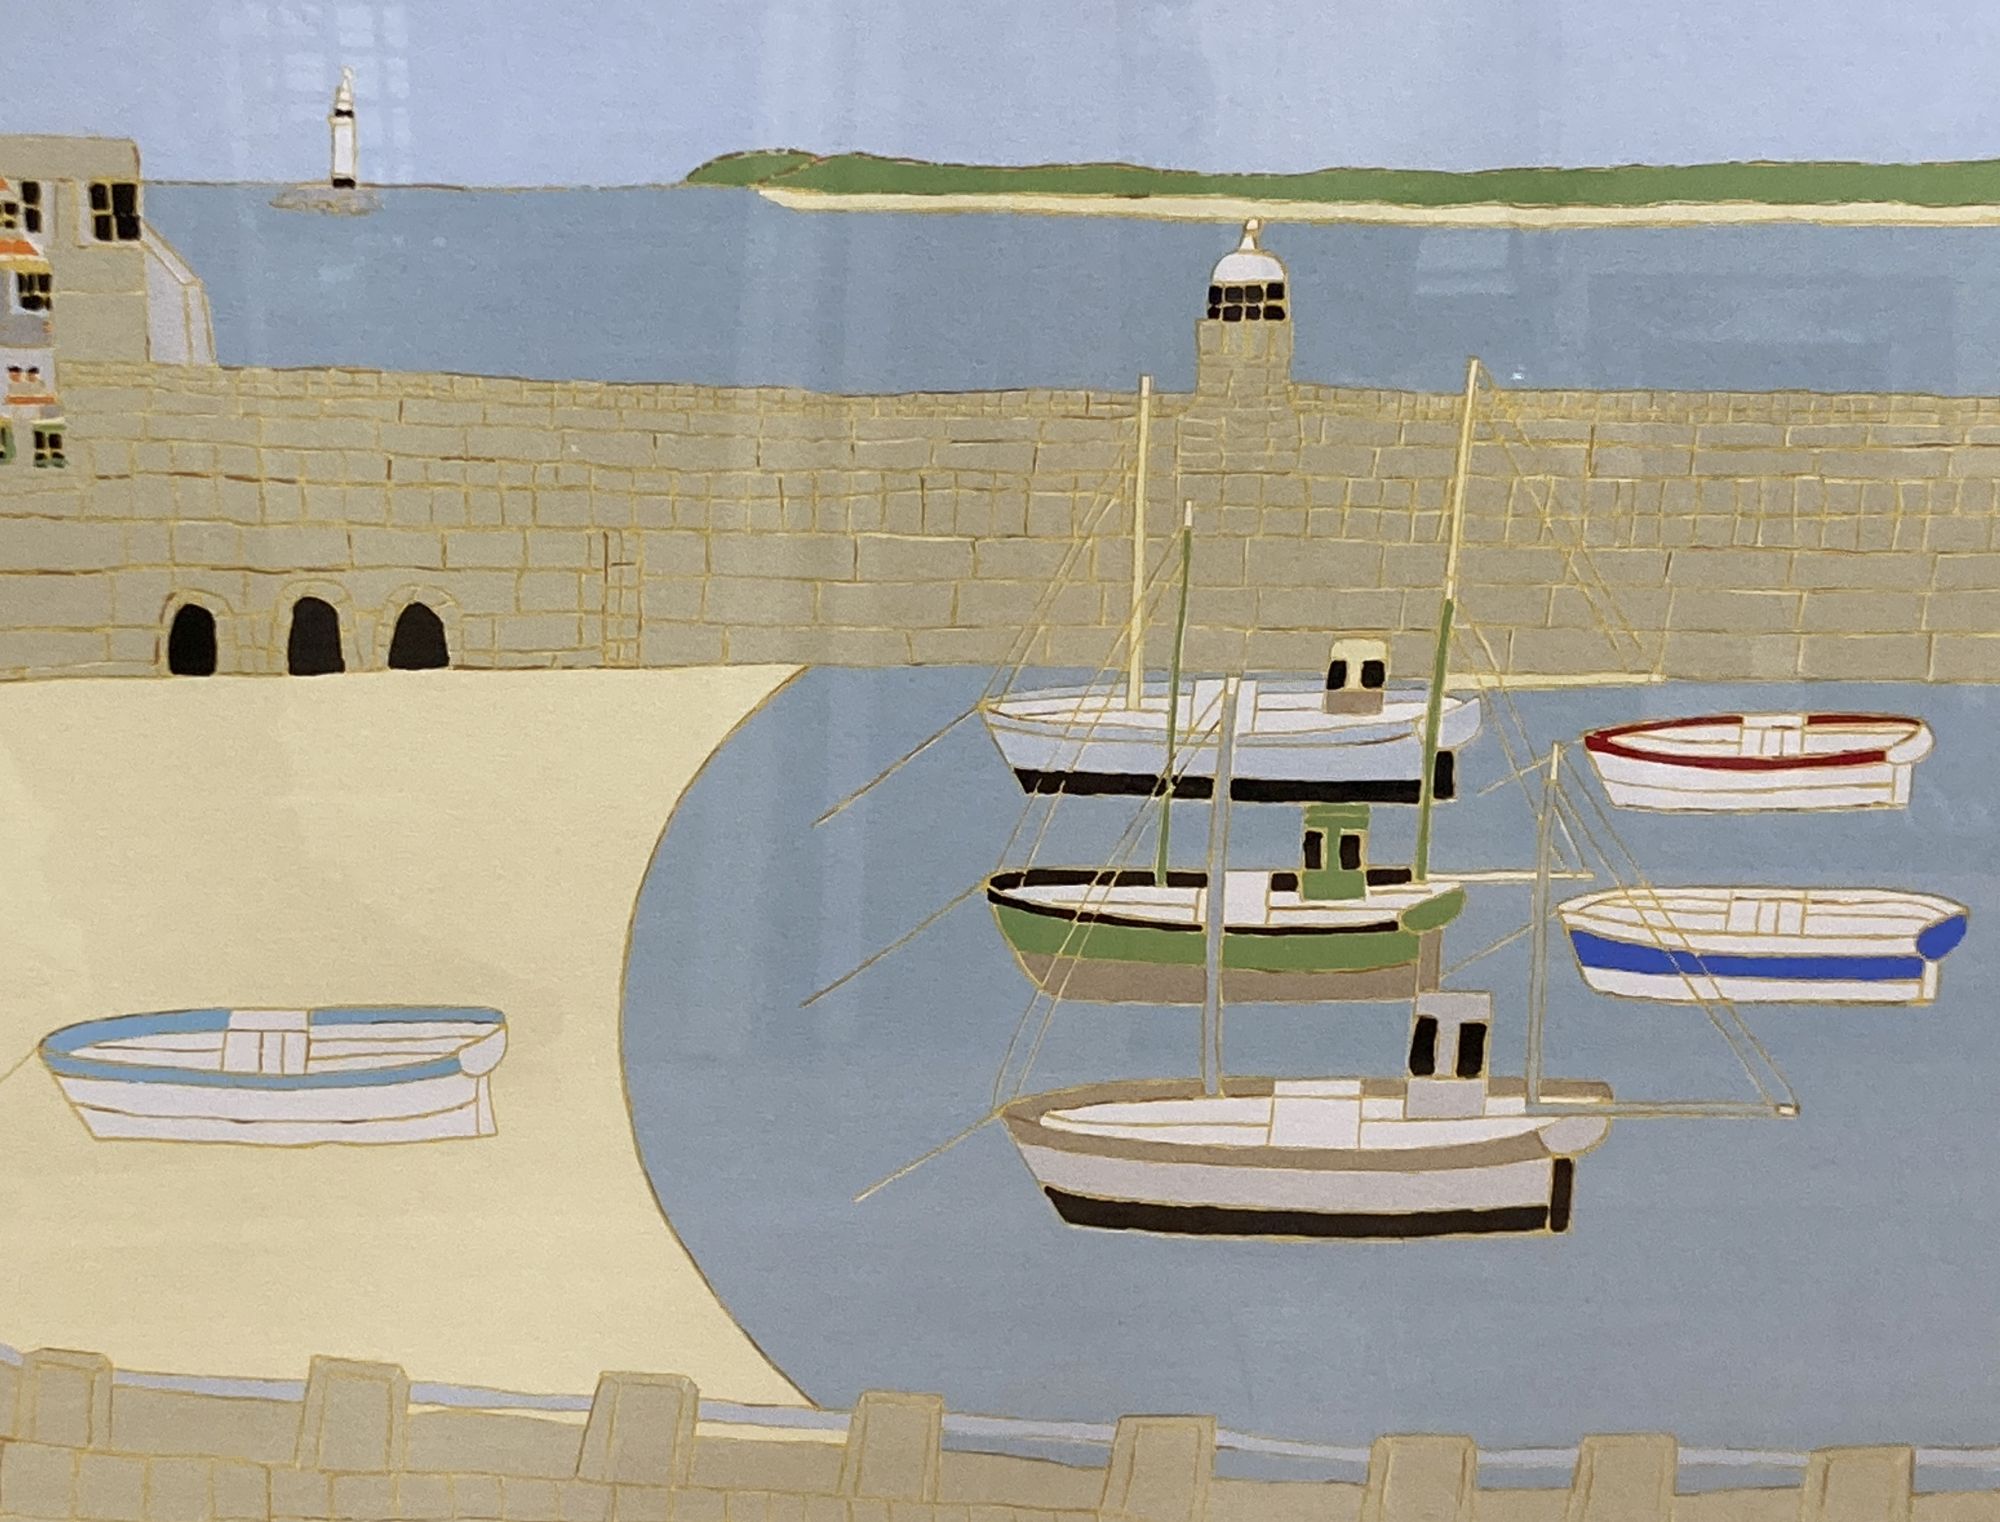 Bryan Pearce (1929-2006), St Ives Society of Artists, Toward Godrevy Facing Smeaton Pier,